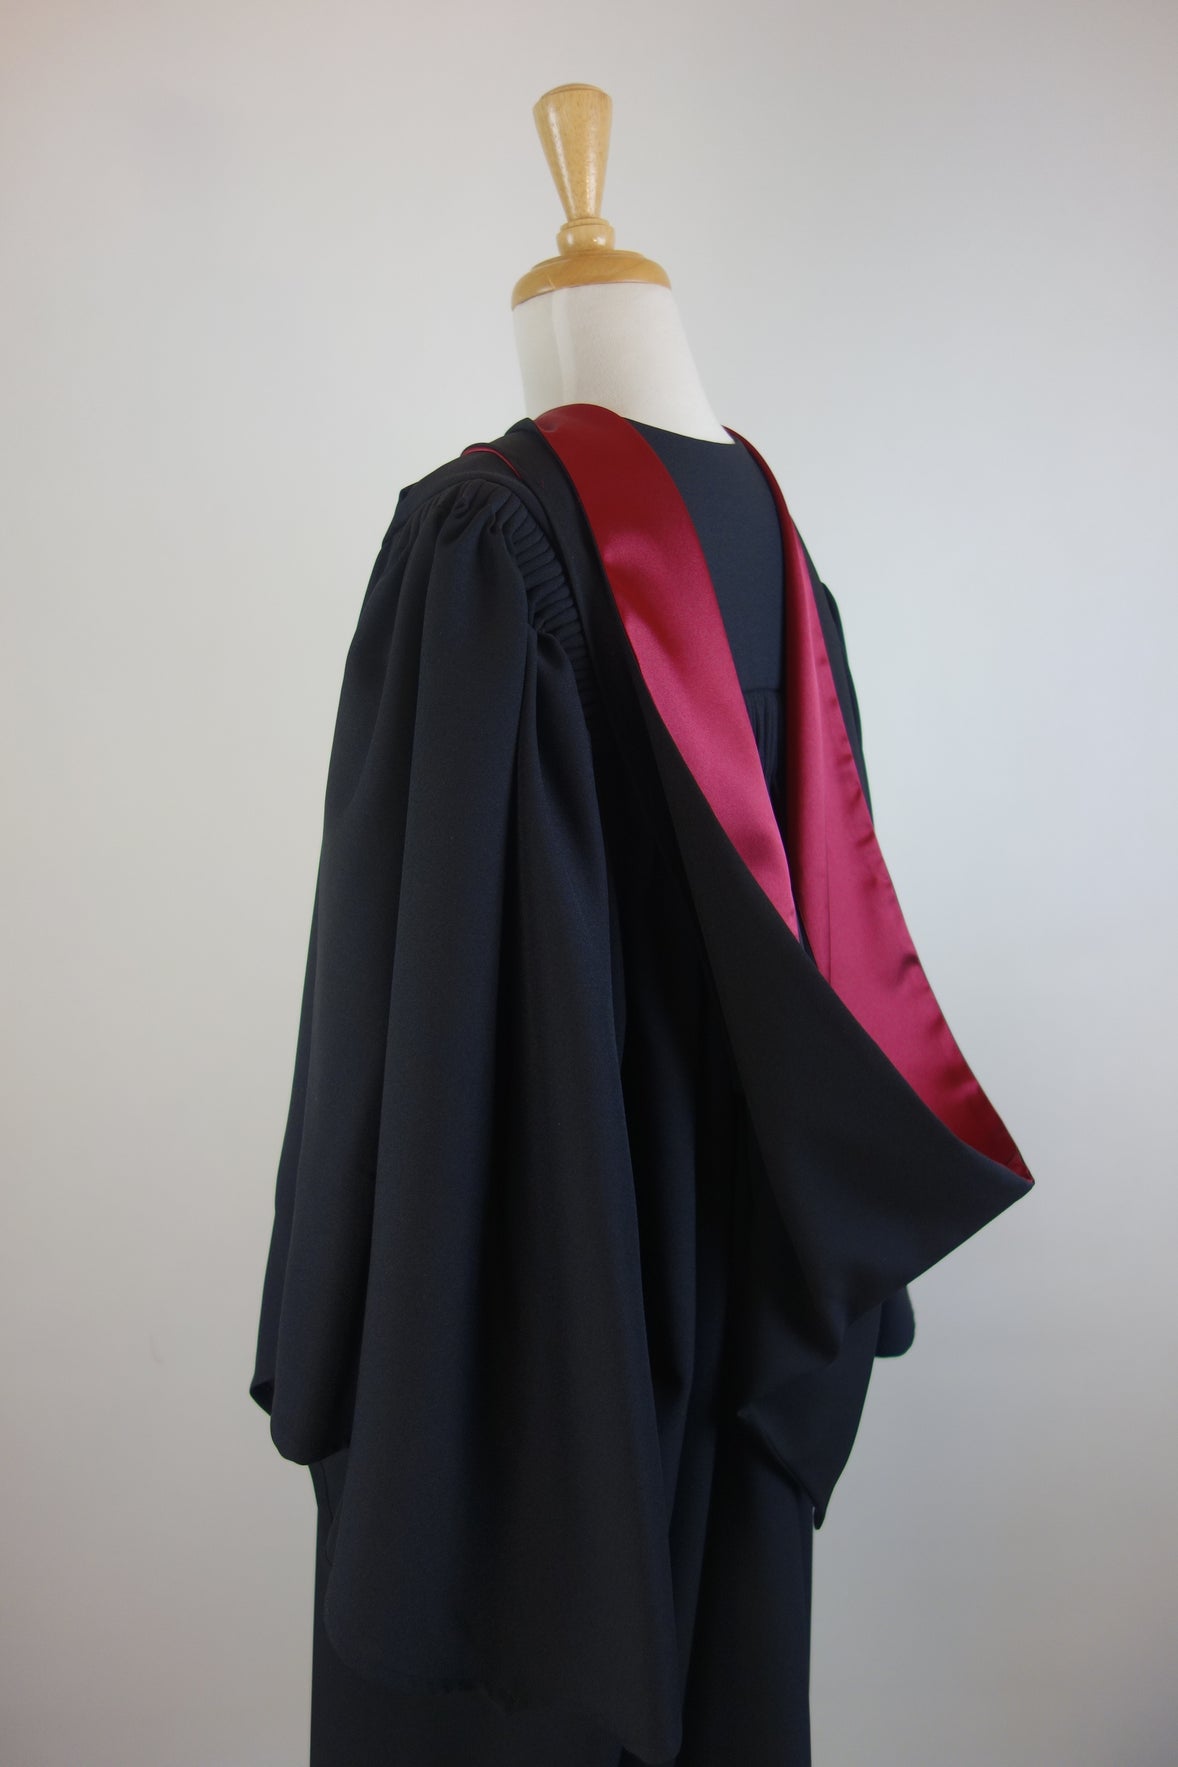 Buy Oxford Style, Half Lined Academic Hood Online at George H Lilley™️